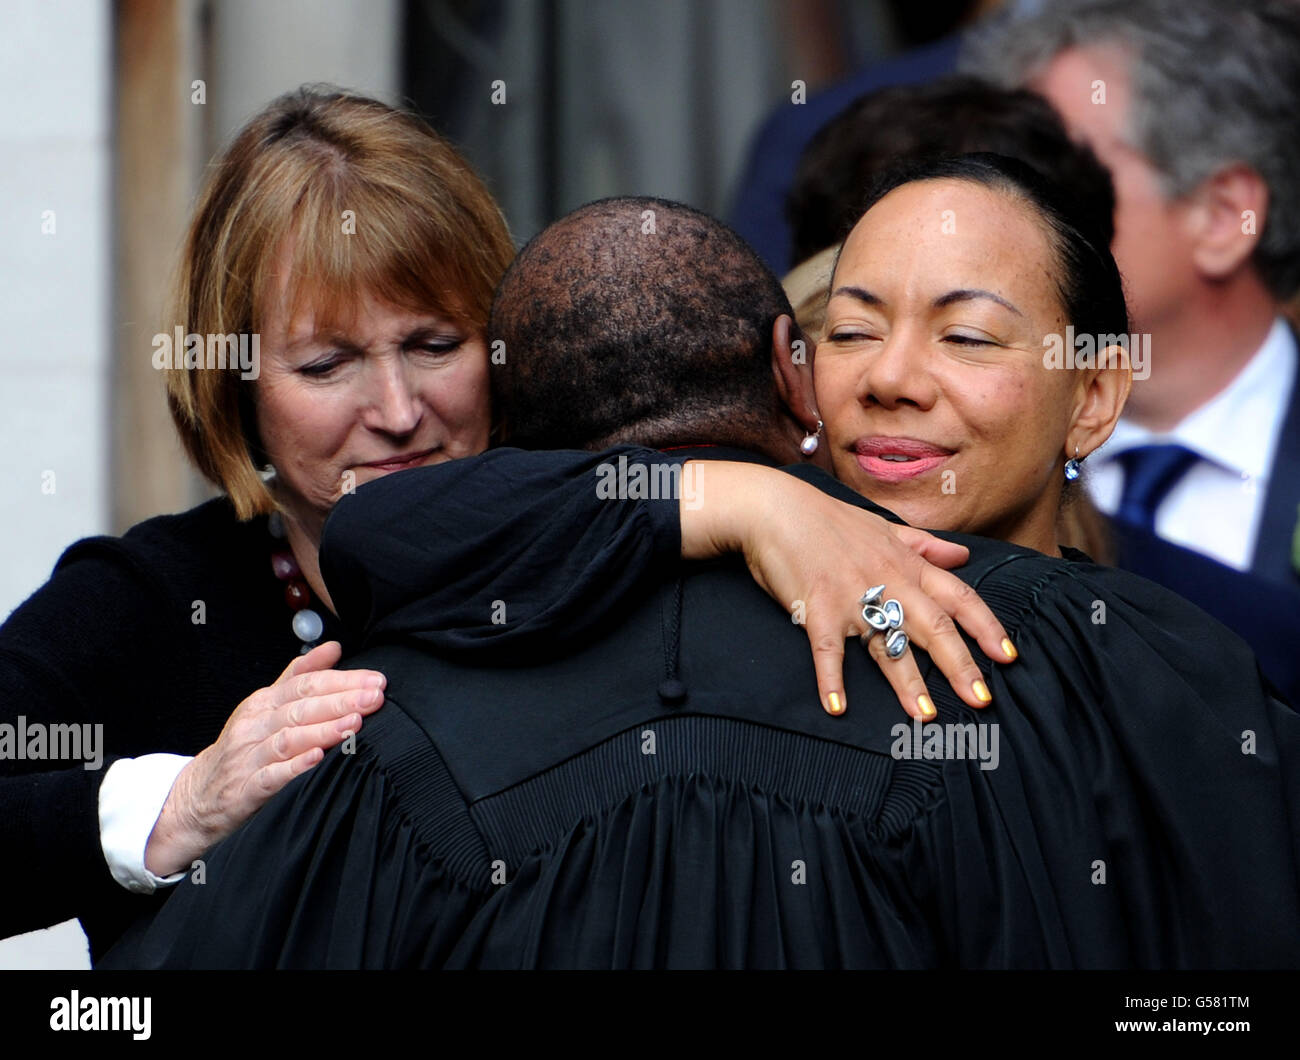 Labour MP Harriet Harman (left) and Oona King (right) hug, with Speaker's Chaplain, the Reverend Rose Hudson-Wilkin, as they leave following a Service of Prayer and Remembrance to commemorate murdered MP Jo Cox, at St Margaret's in Westminster, central London. Stock Photo